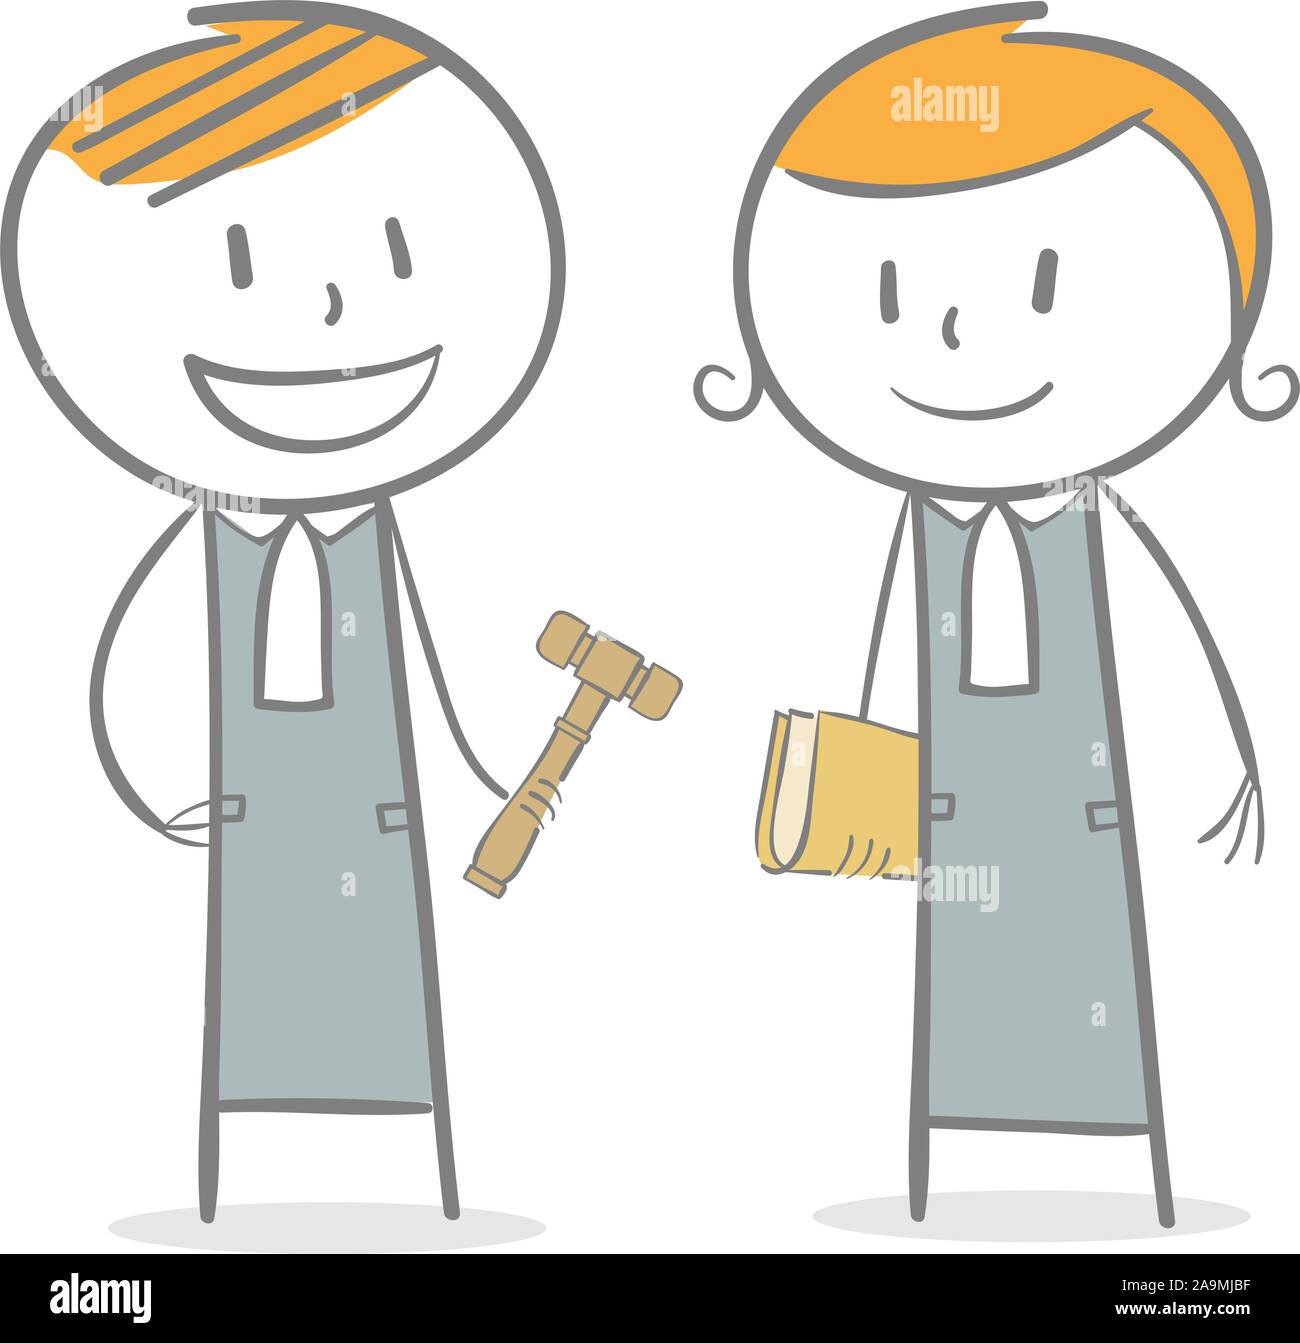 Doodle stick figure: A judge with gavel and a lawyer Stock Vector